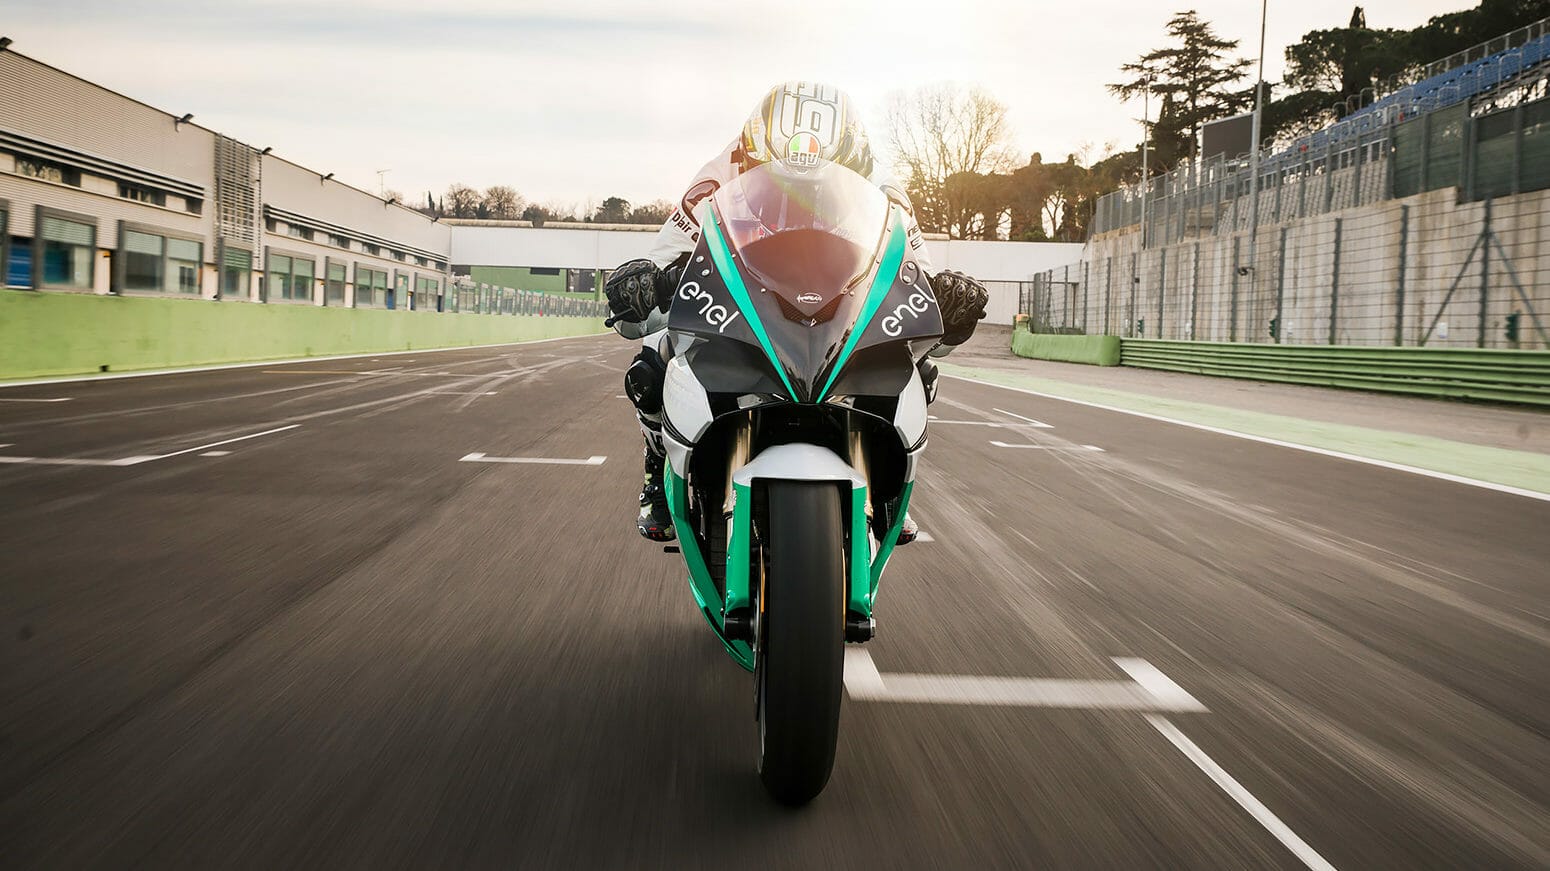 MotoE, contract with Energica expires
- also in the MOTORCYCLES.NEWS APP